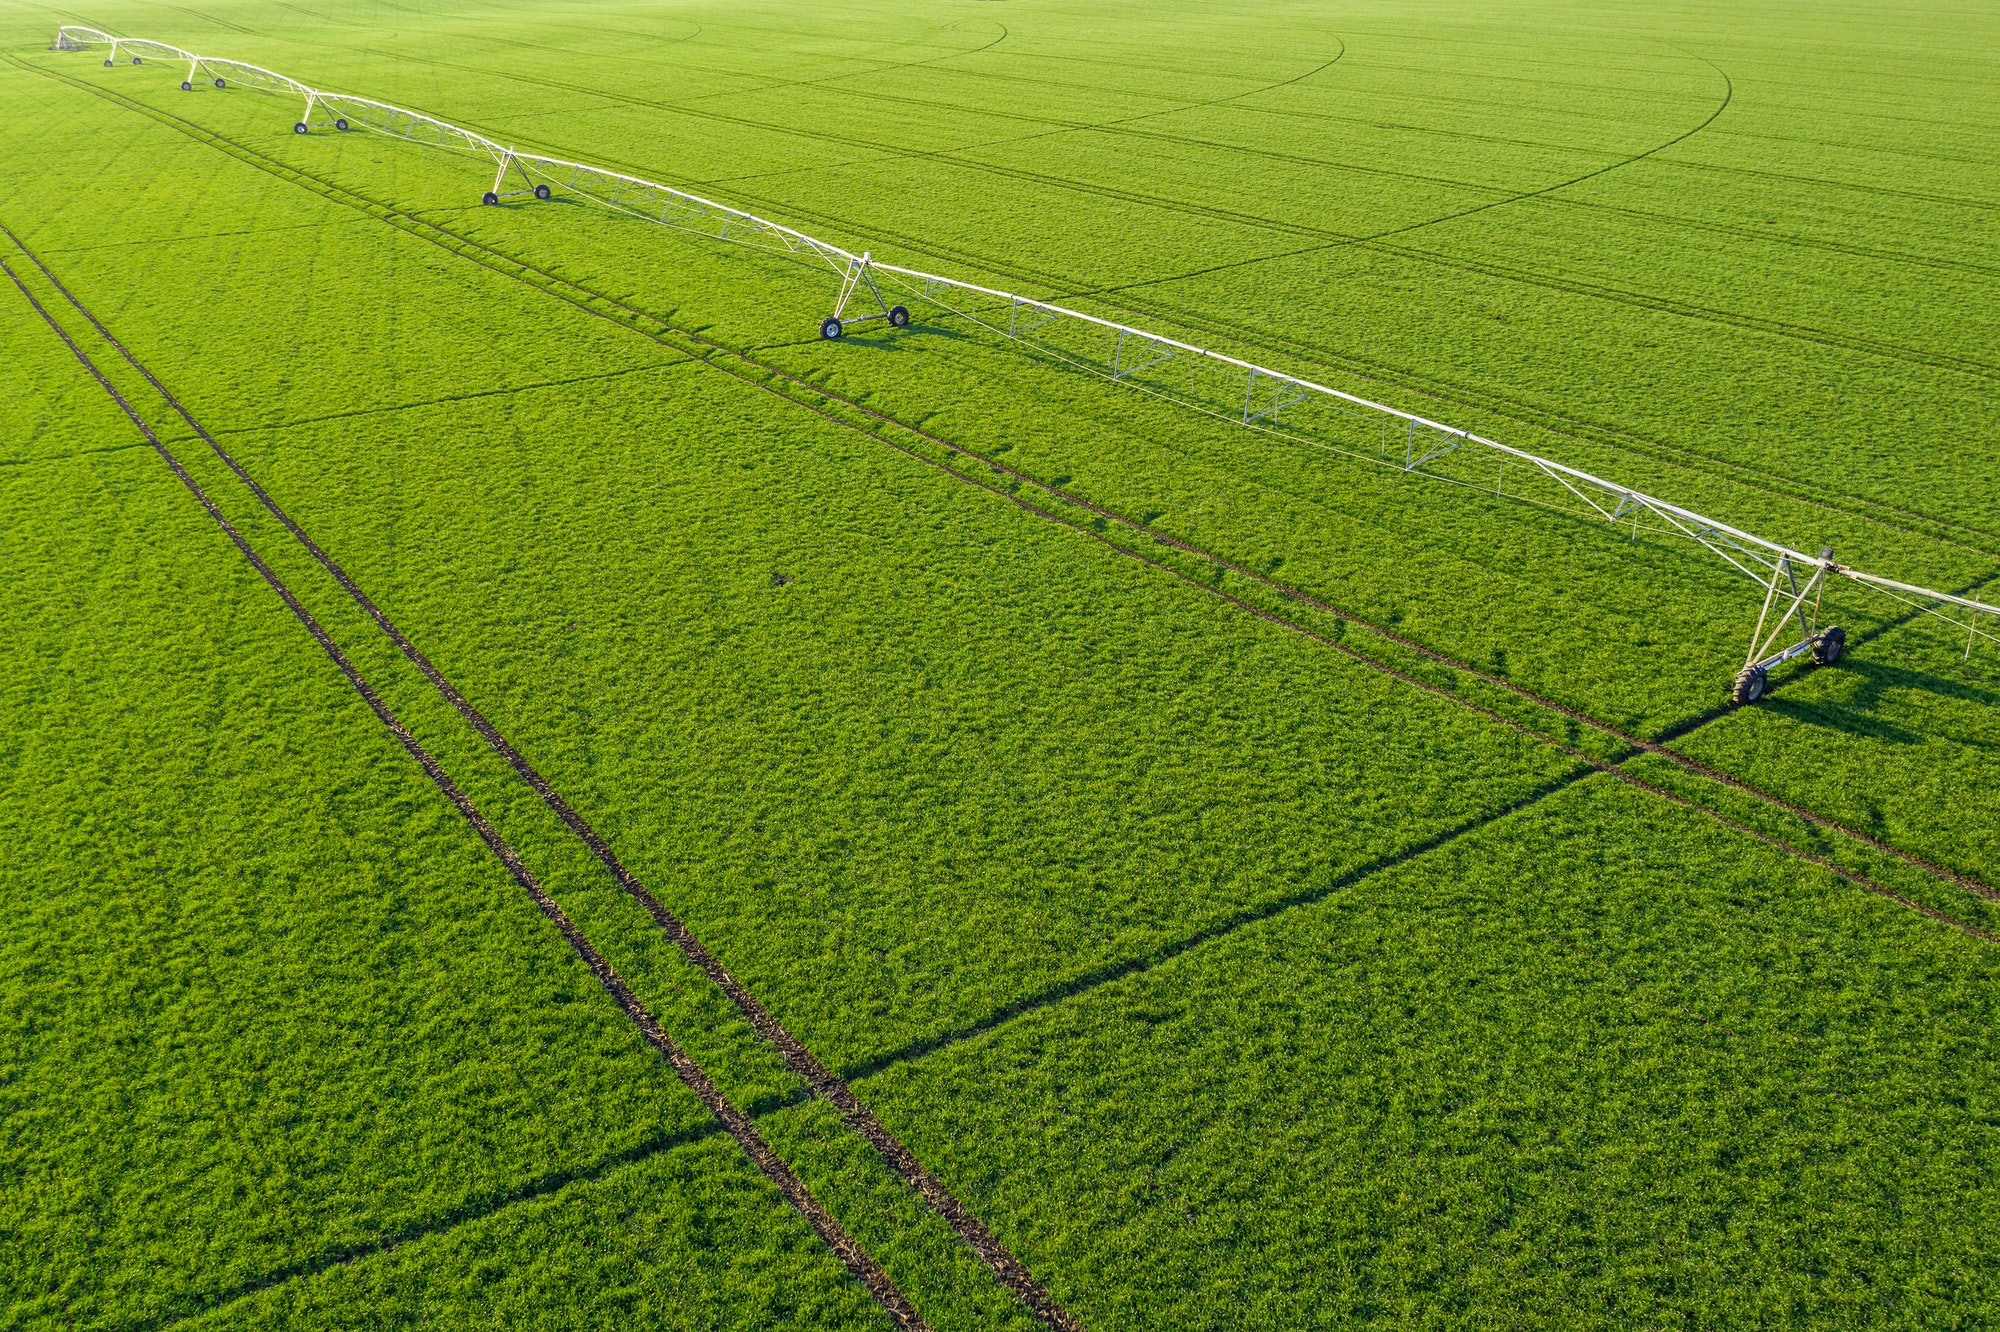 Aerial view of center-pivot irrigation sprinkler in wheat field